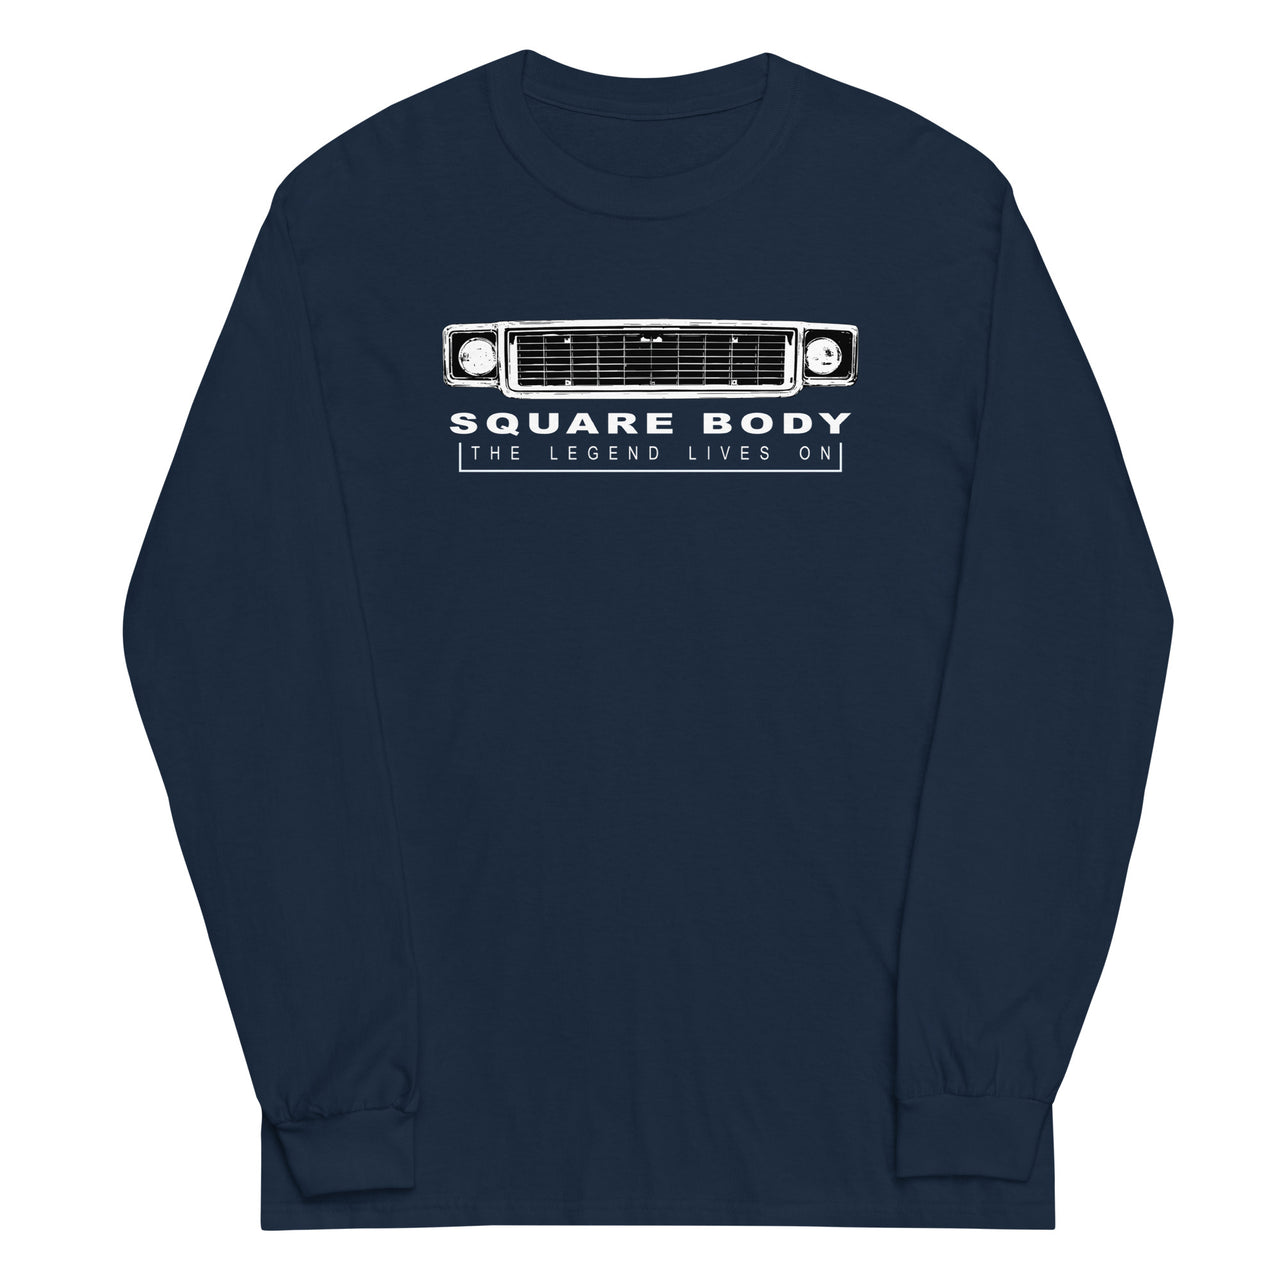 70s Square Body Long Sleeve T-Shirt modeled in navy